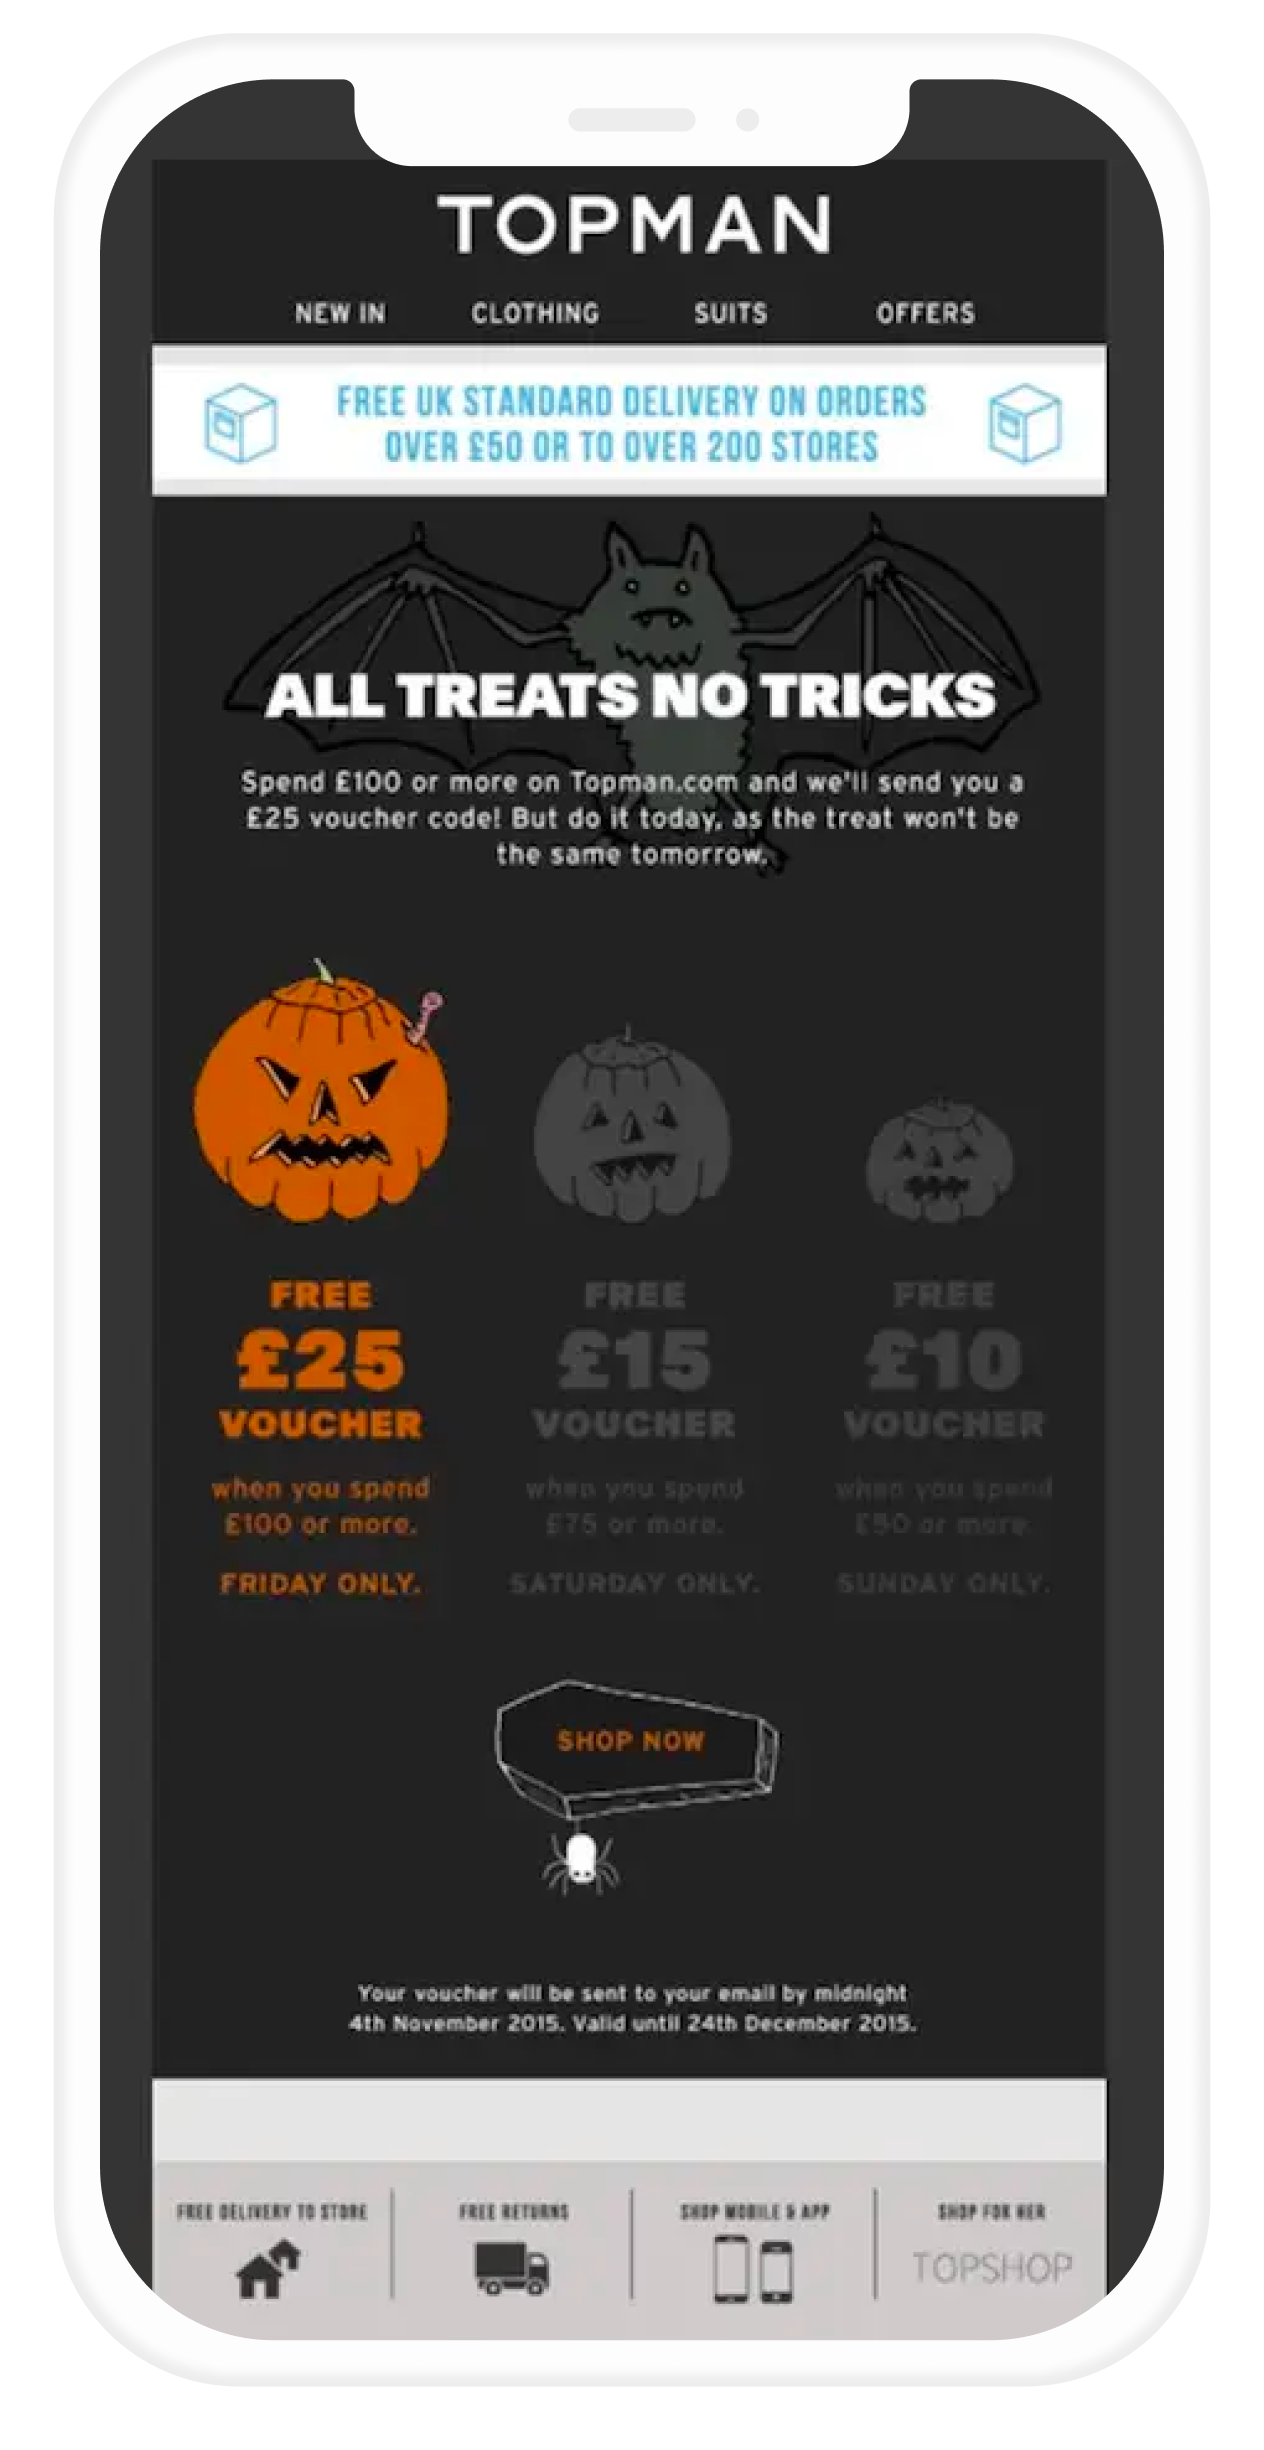 Topman Halloween email focused on deals and how to get more out of them.